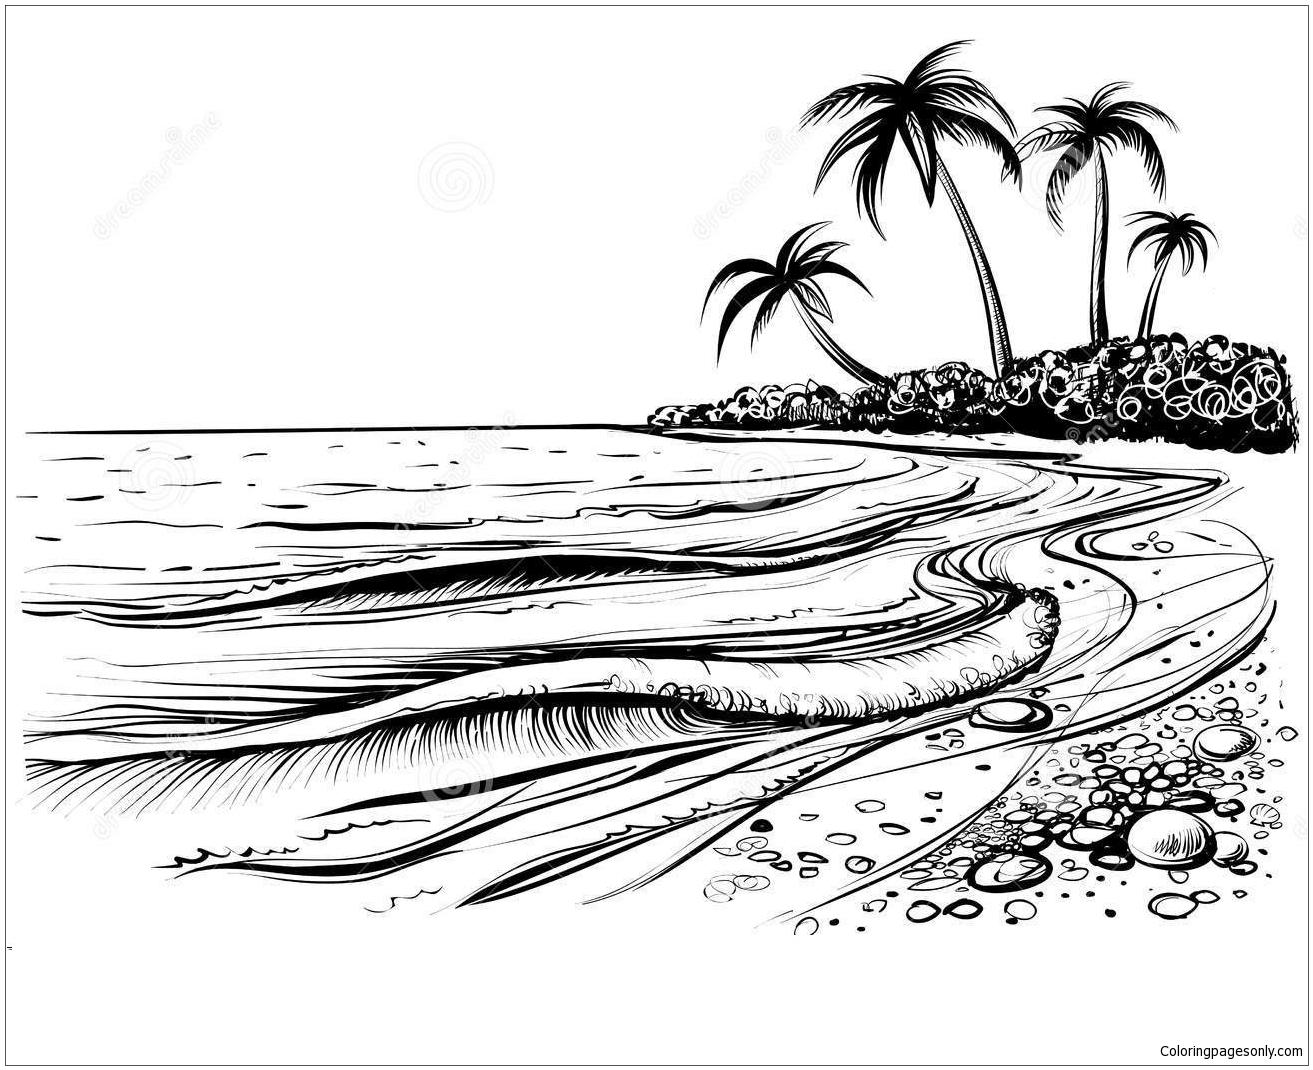 Sea Beach With Waves Coloring Page - Free Coloring Pages ...